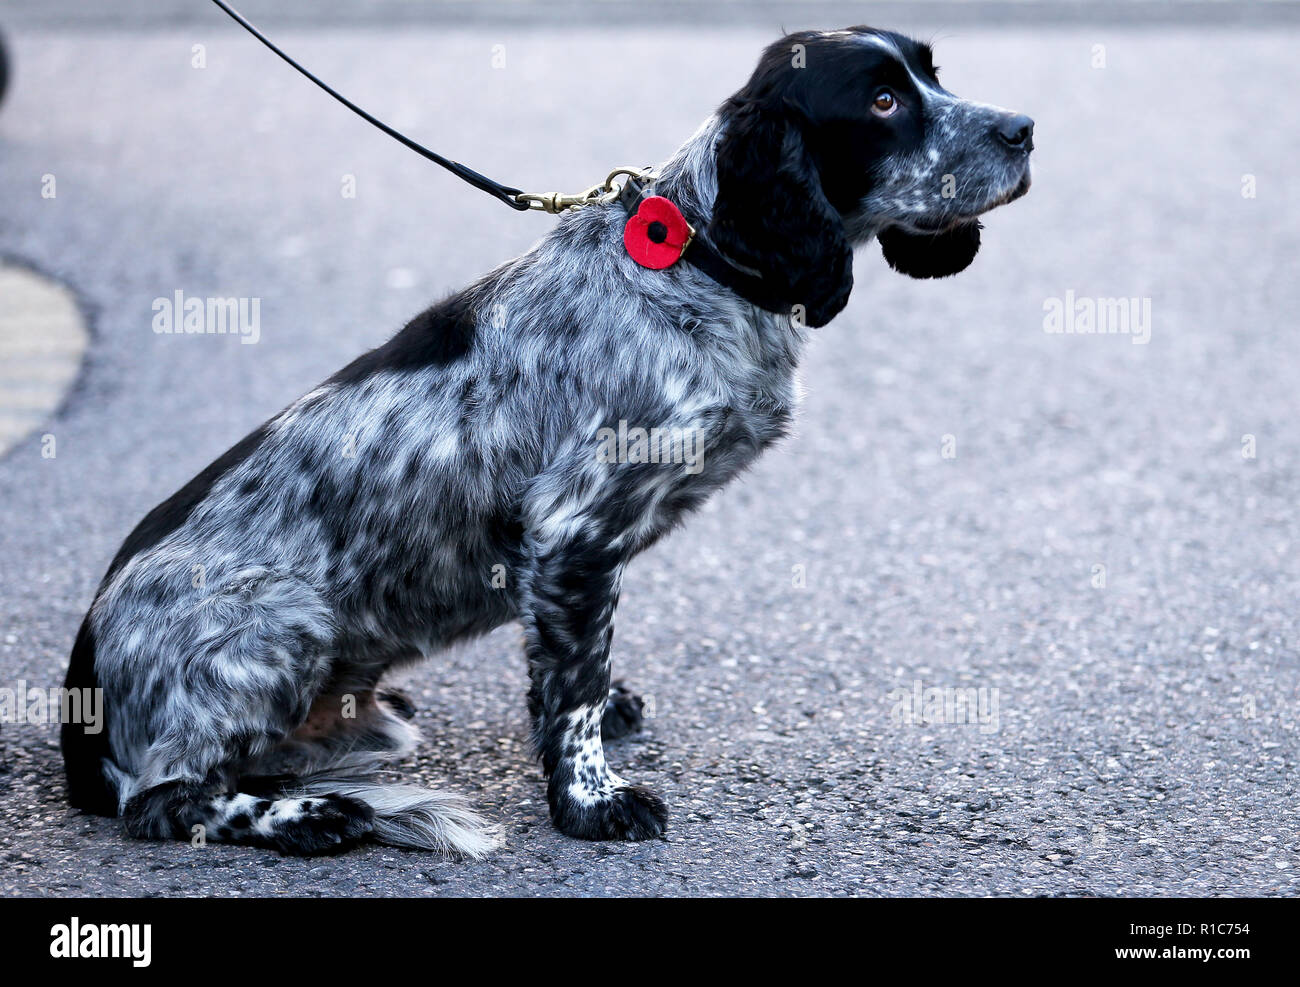 A search dog before the Premier League match at Stamford Bridge, London. PRESS ASSOCIATION Photo. Picture date: Sunday November 11, 2018. See PA story SOCCER Chelsea. Photo credit should read: Steven Paston/PA Wire. RESTRICTIONS: No use with unauthorised audio, video, data, fixture lists, club/league logos or 'live' services. Online in-match use limited to 120 images, no video emulation. No use in betting, games or single club/league/player publications. Stock Photo